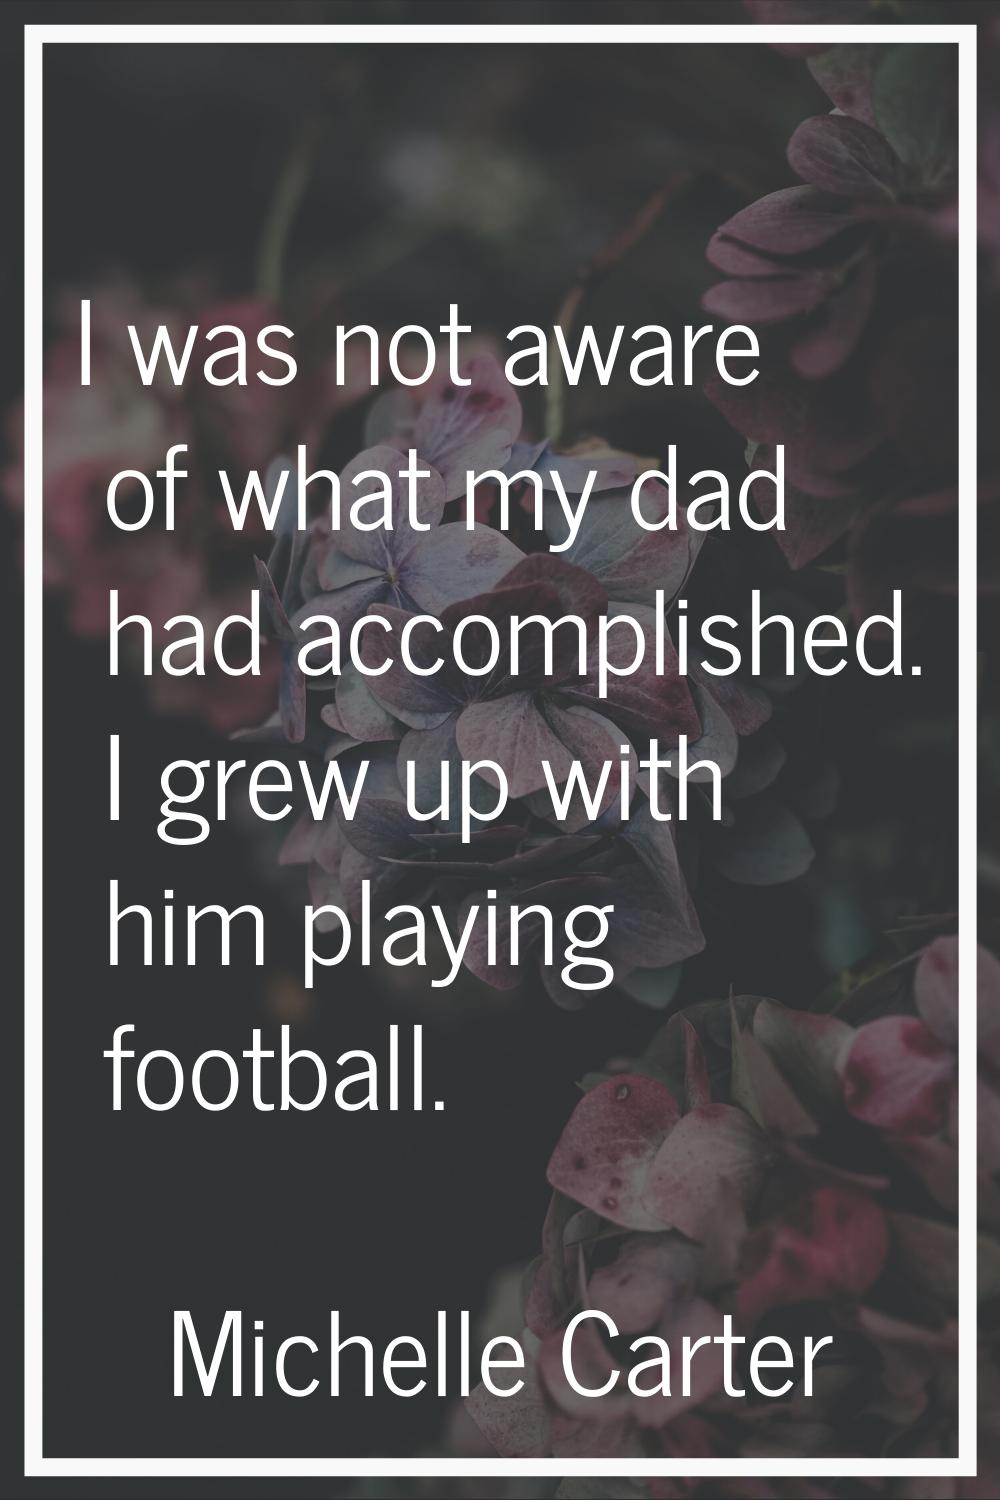 I was not aware of what my dad had accomplished. I grew up with him playing football.